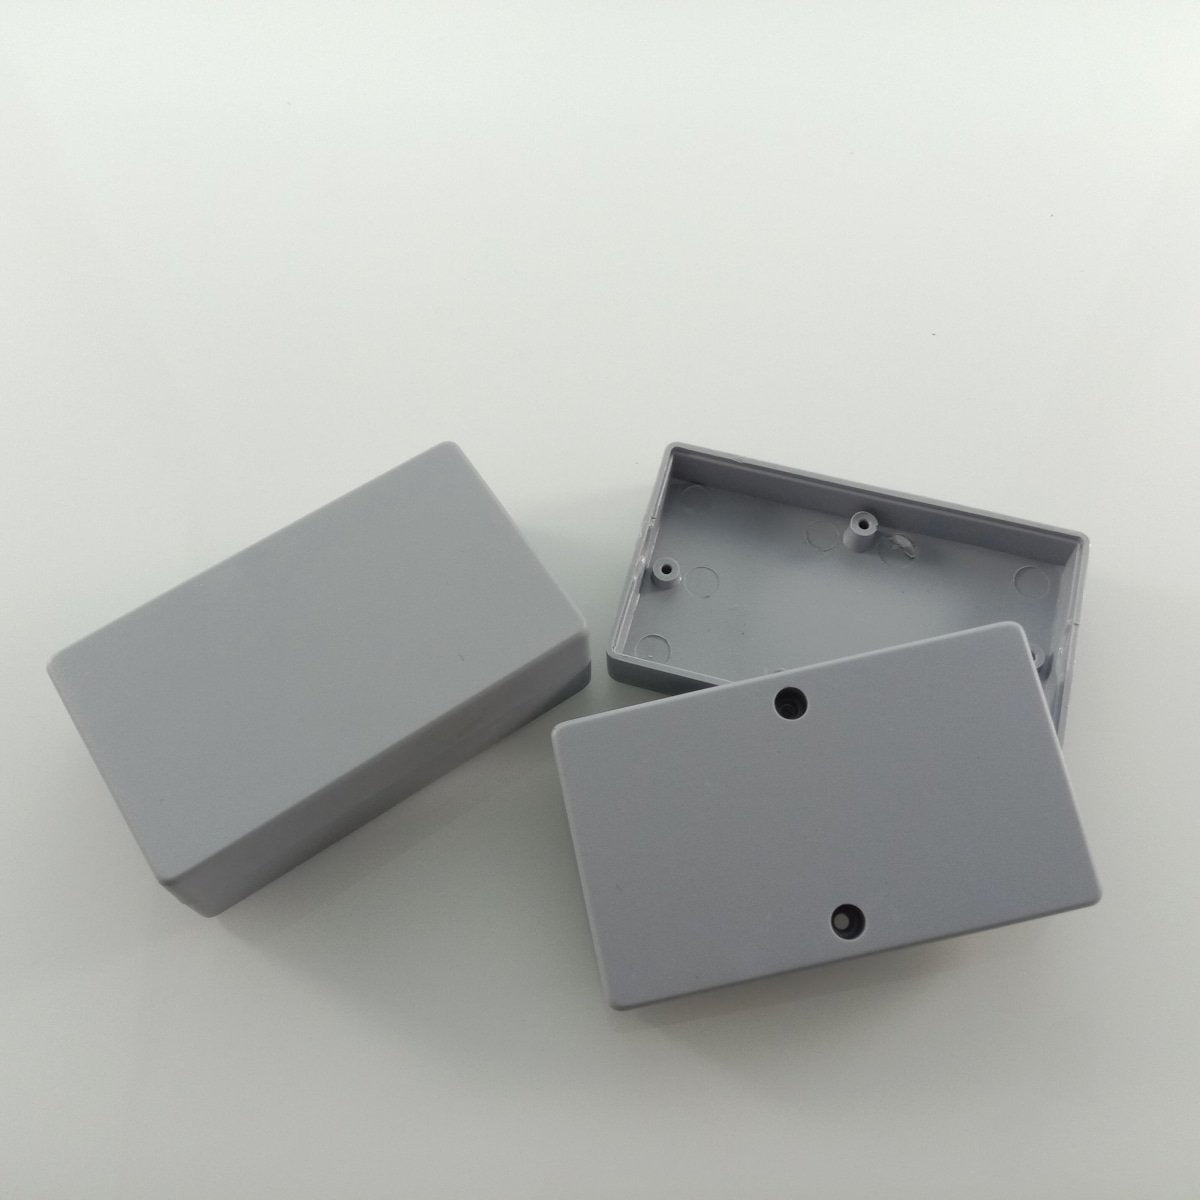 1pcs Electronic Project Case Box Enclosure Junction Box 50/55/70/80/90mm Length - 73x43x23mm - - Asia Sell